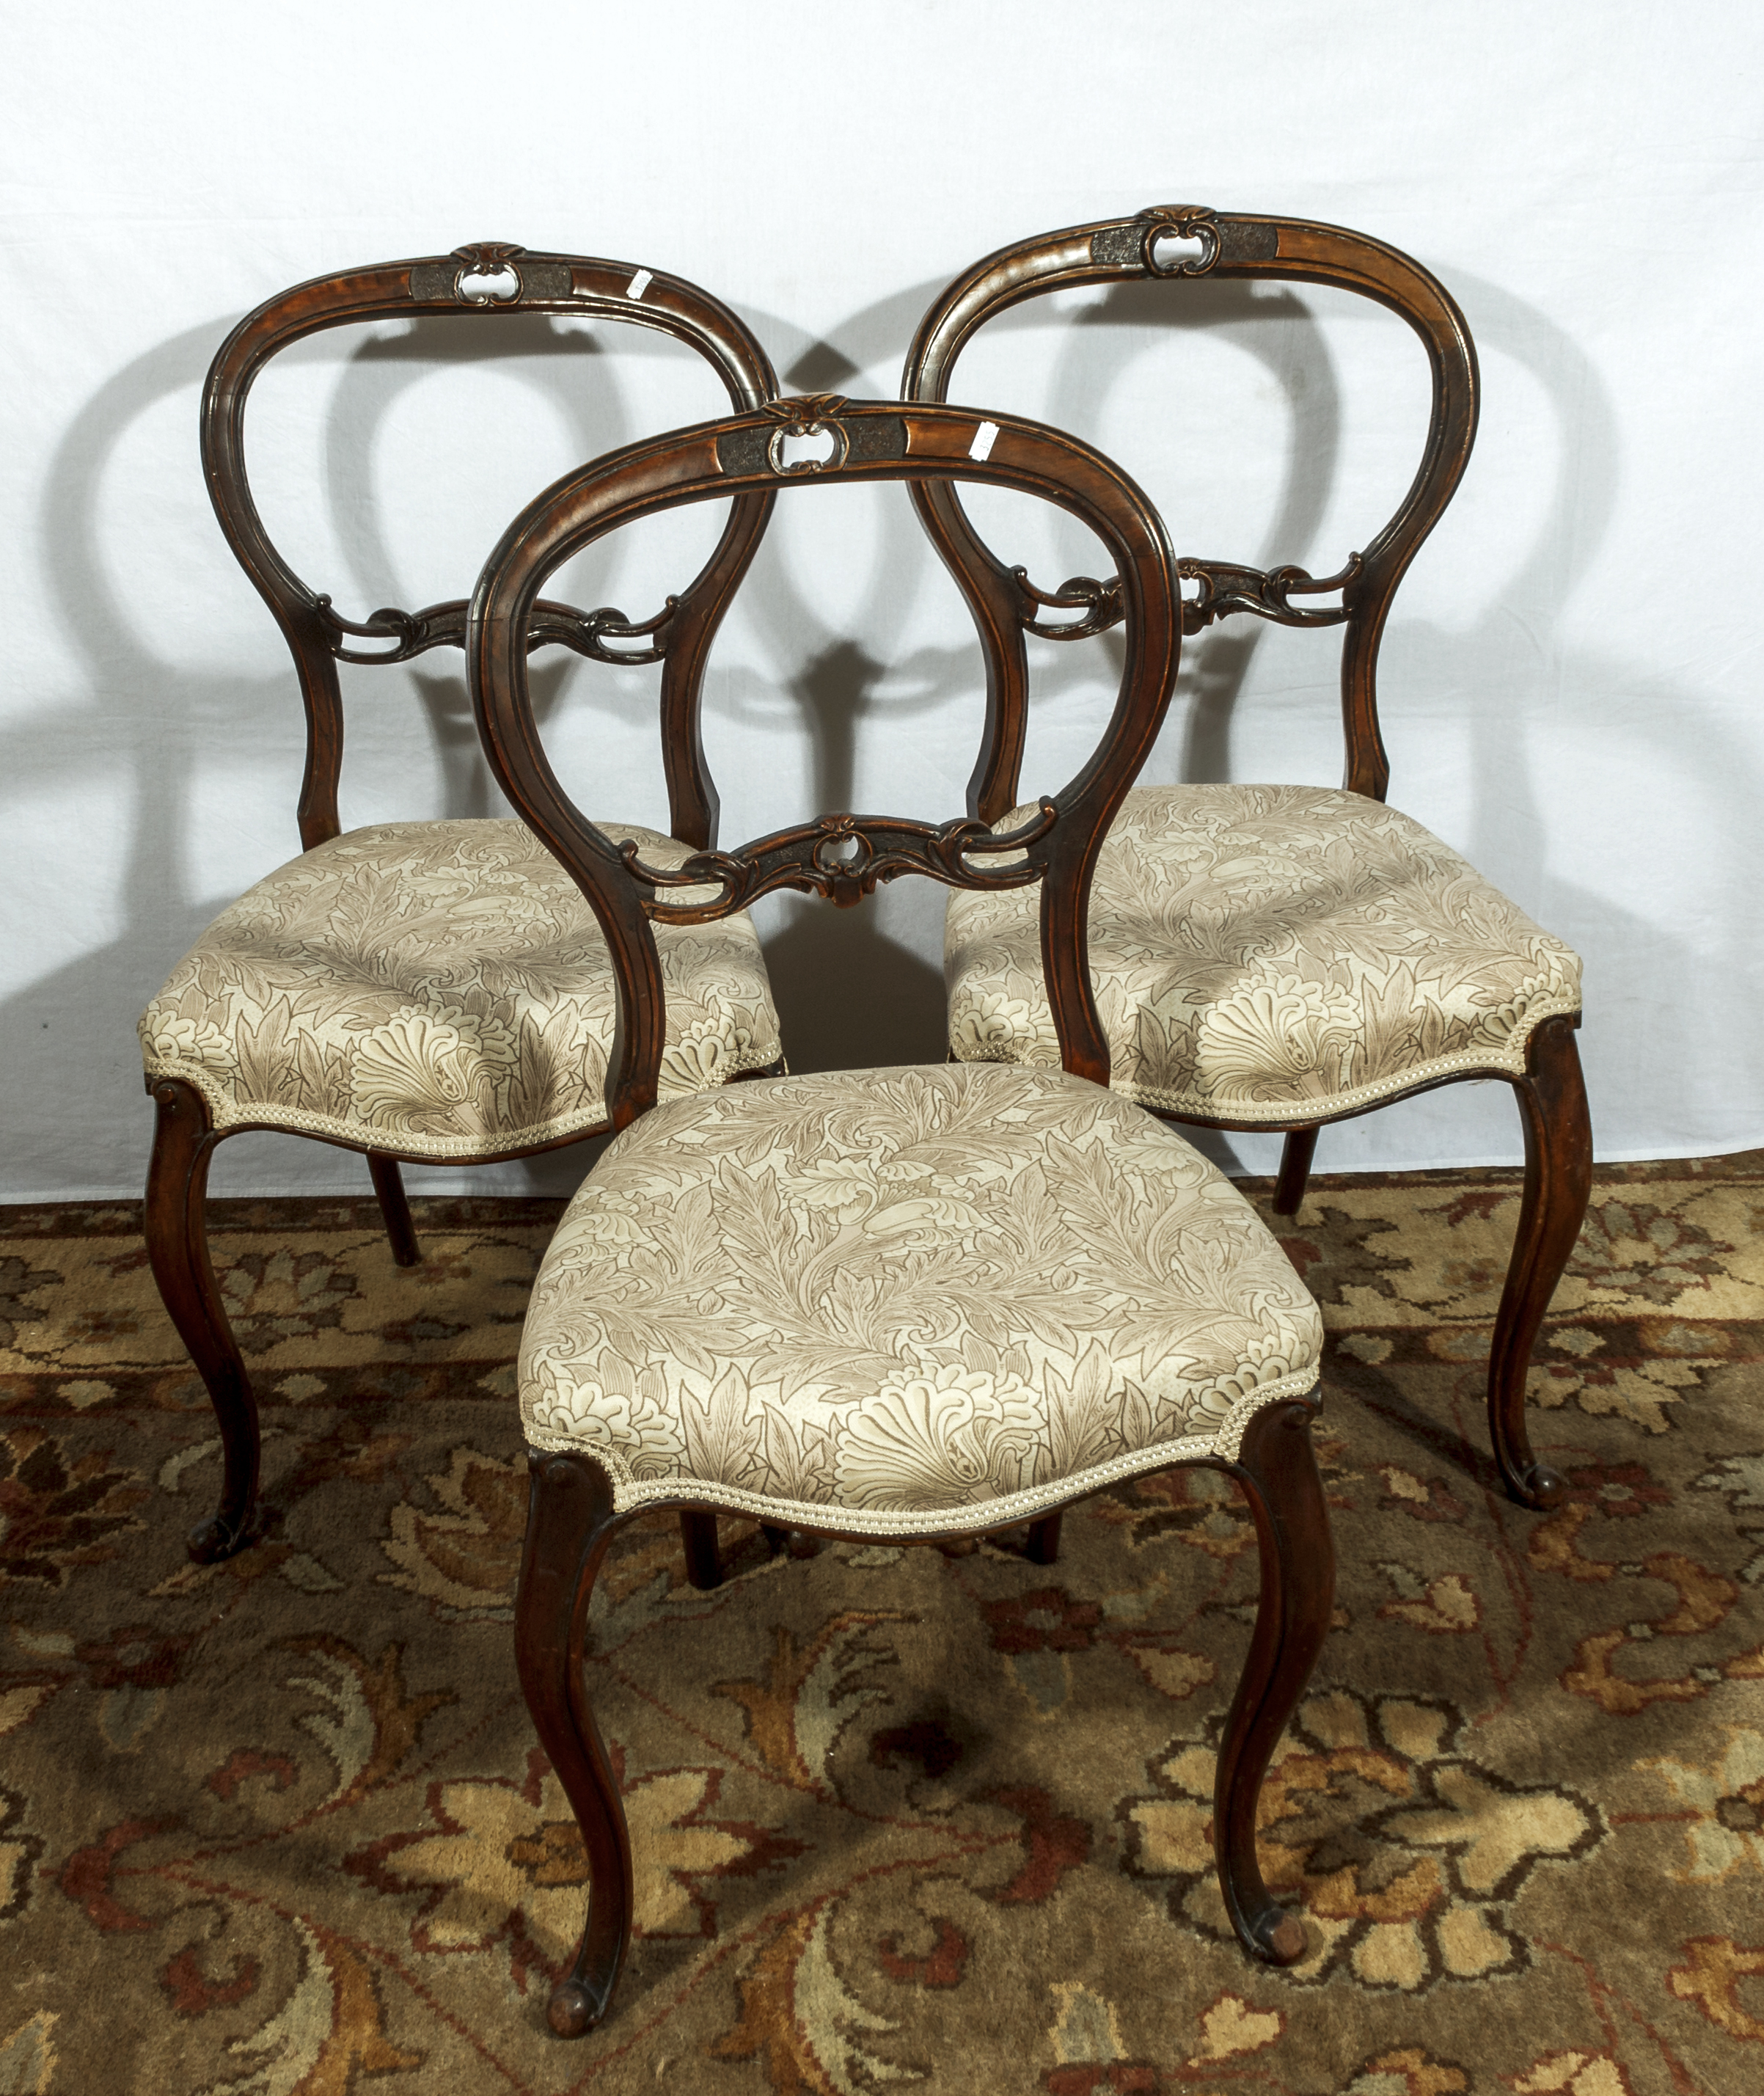 Three balloon back dining chairs